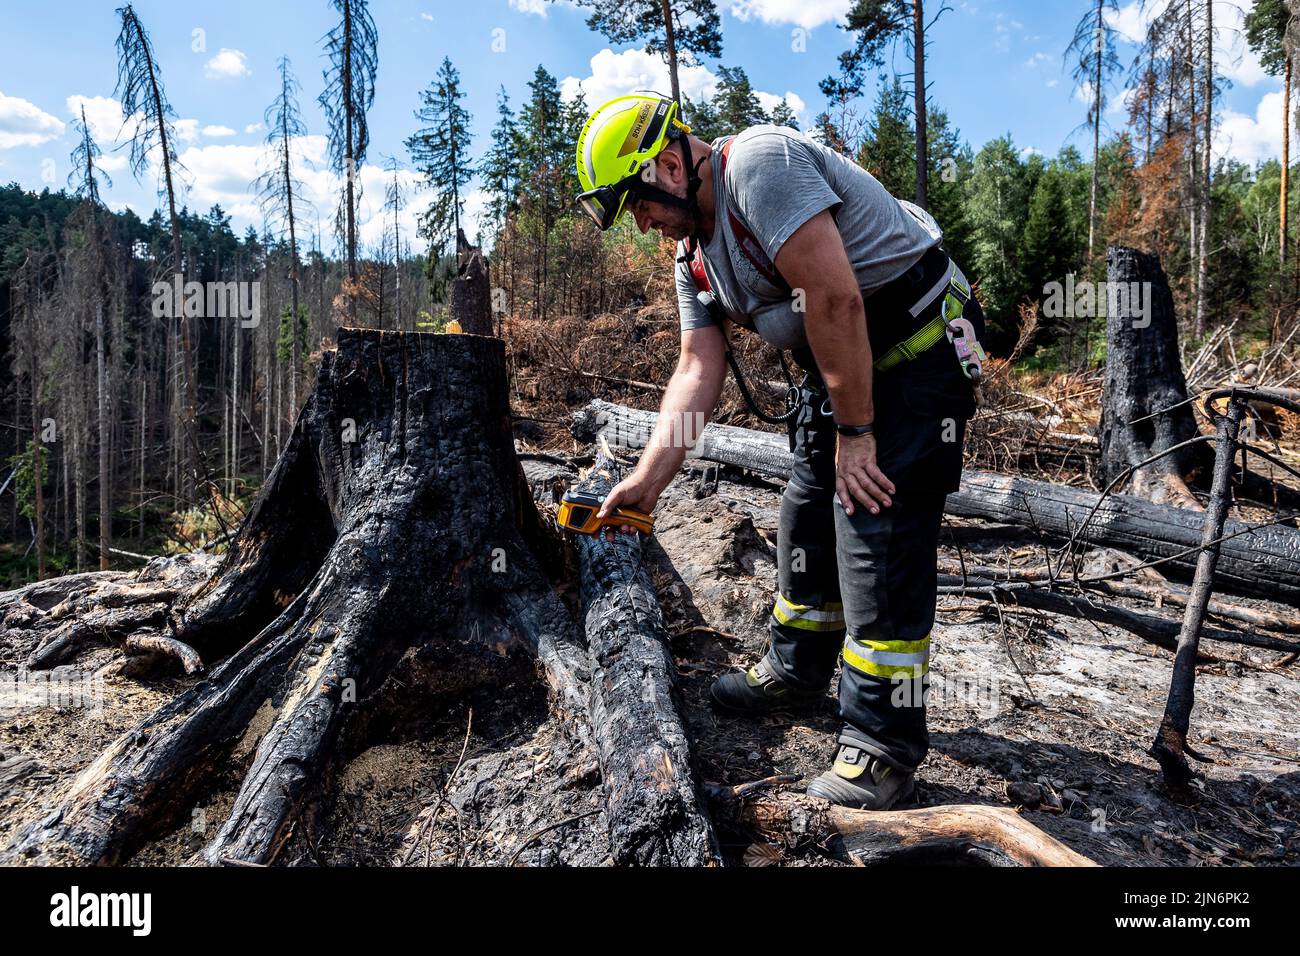 Hrensko, Czech Republic. 09th Aug, 2022. The burnt forests in the Ceske Svycarsko (Czech Switzerland) National Park, Czech Republic, August 9, 2022. A volunteer firefighter from Kresice in the Decin region measures the temperature of burnt trees with a thermal imaging camera in the Long Mine above the Edmund (Silent) Gorge, where he is guarding part of the first area handed over by the firefighters to the park administration after the firefighting is finished. Credit: Ondrej Hajek/CTK Photo/Alamy Live News Stock Photo